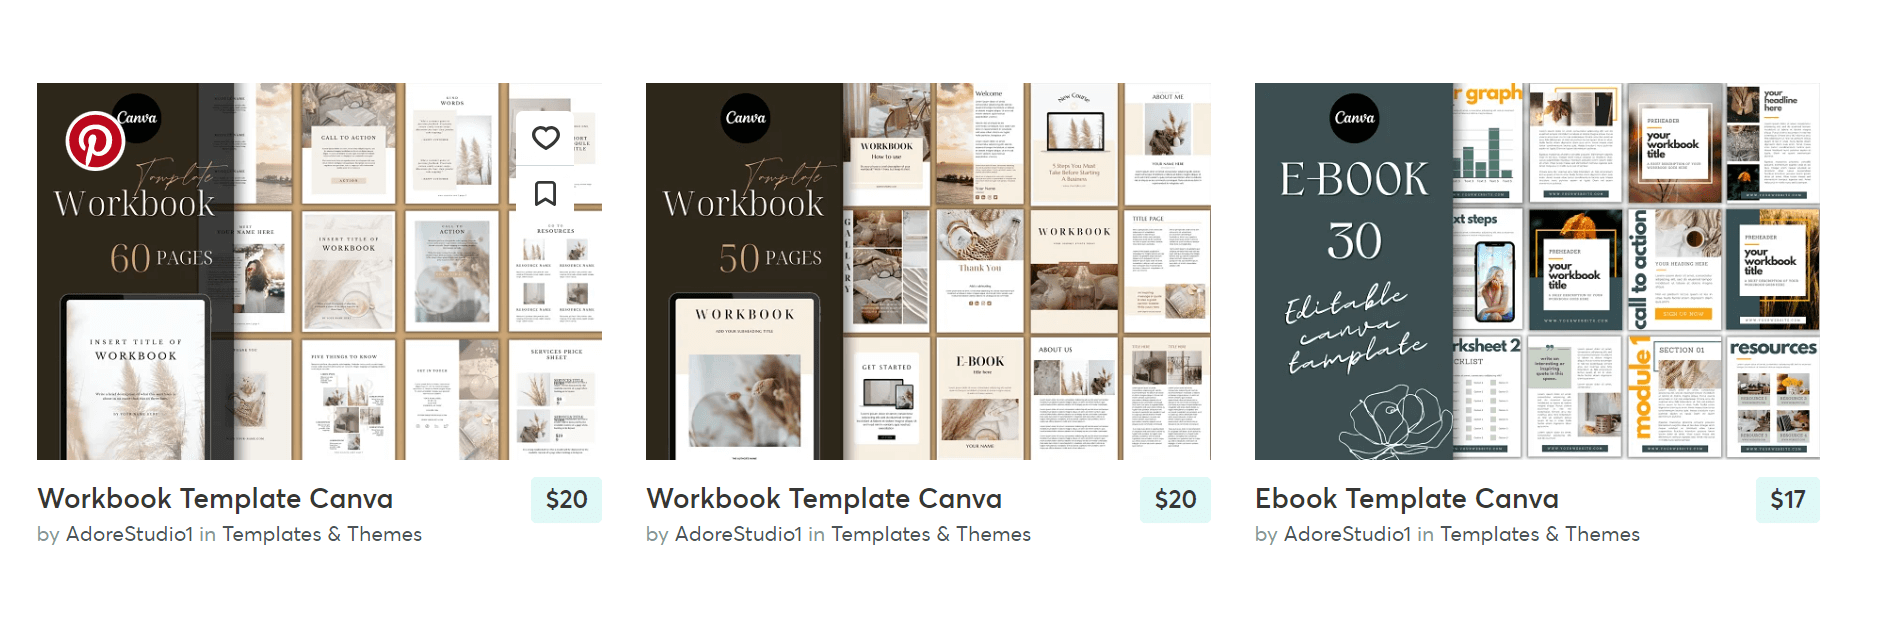 canva templates found on creative market are one of the best digital products to sell